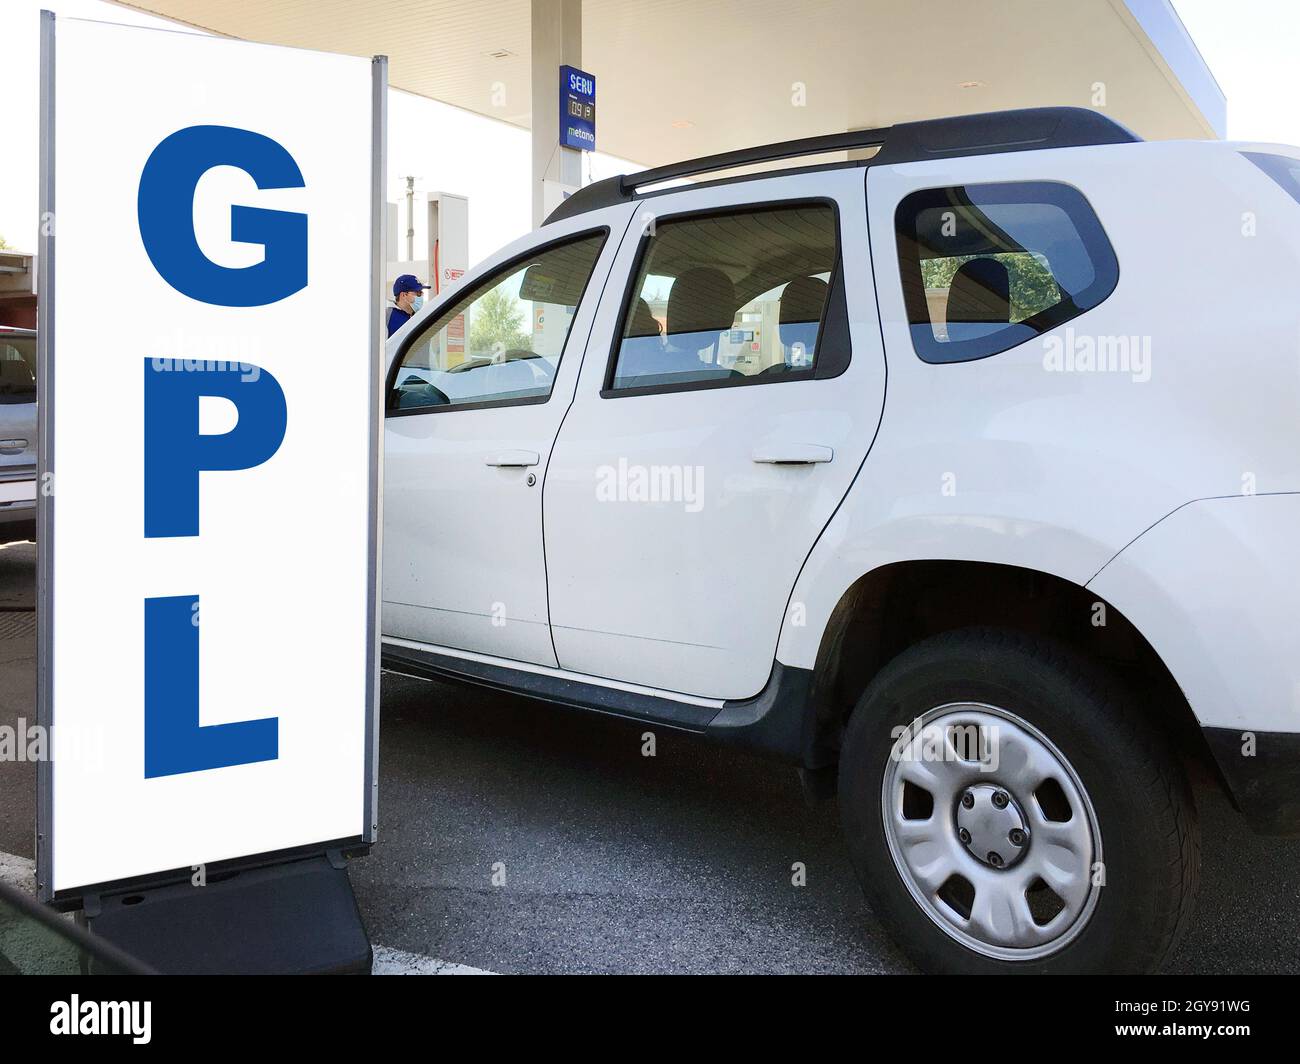 LPG / GPL refueling station. Filling station with pumps. Fuel dispensers LPG. Alternative refuel fuel ,CNG,LPG ,NGV in your vehicle. Stock Photo